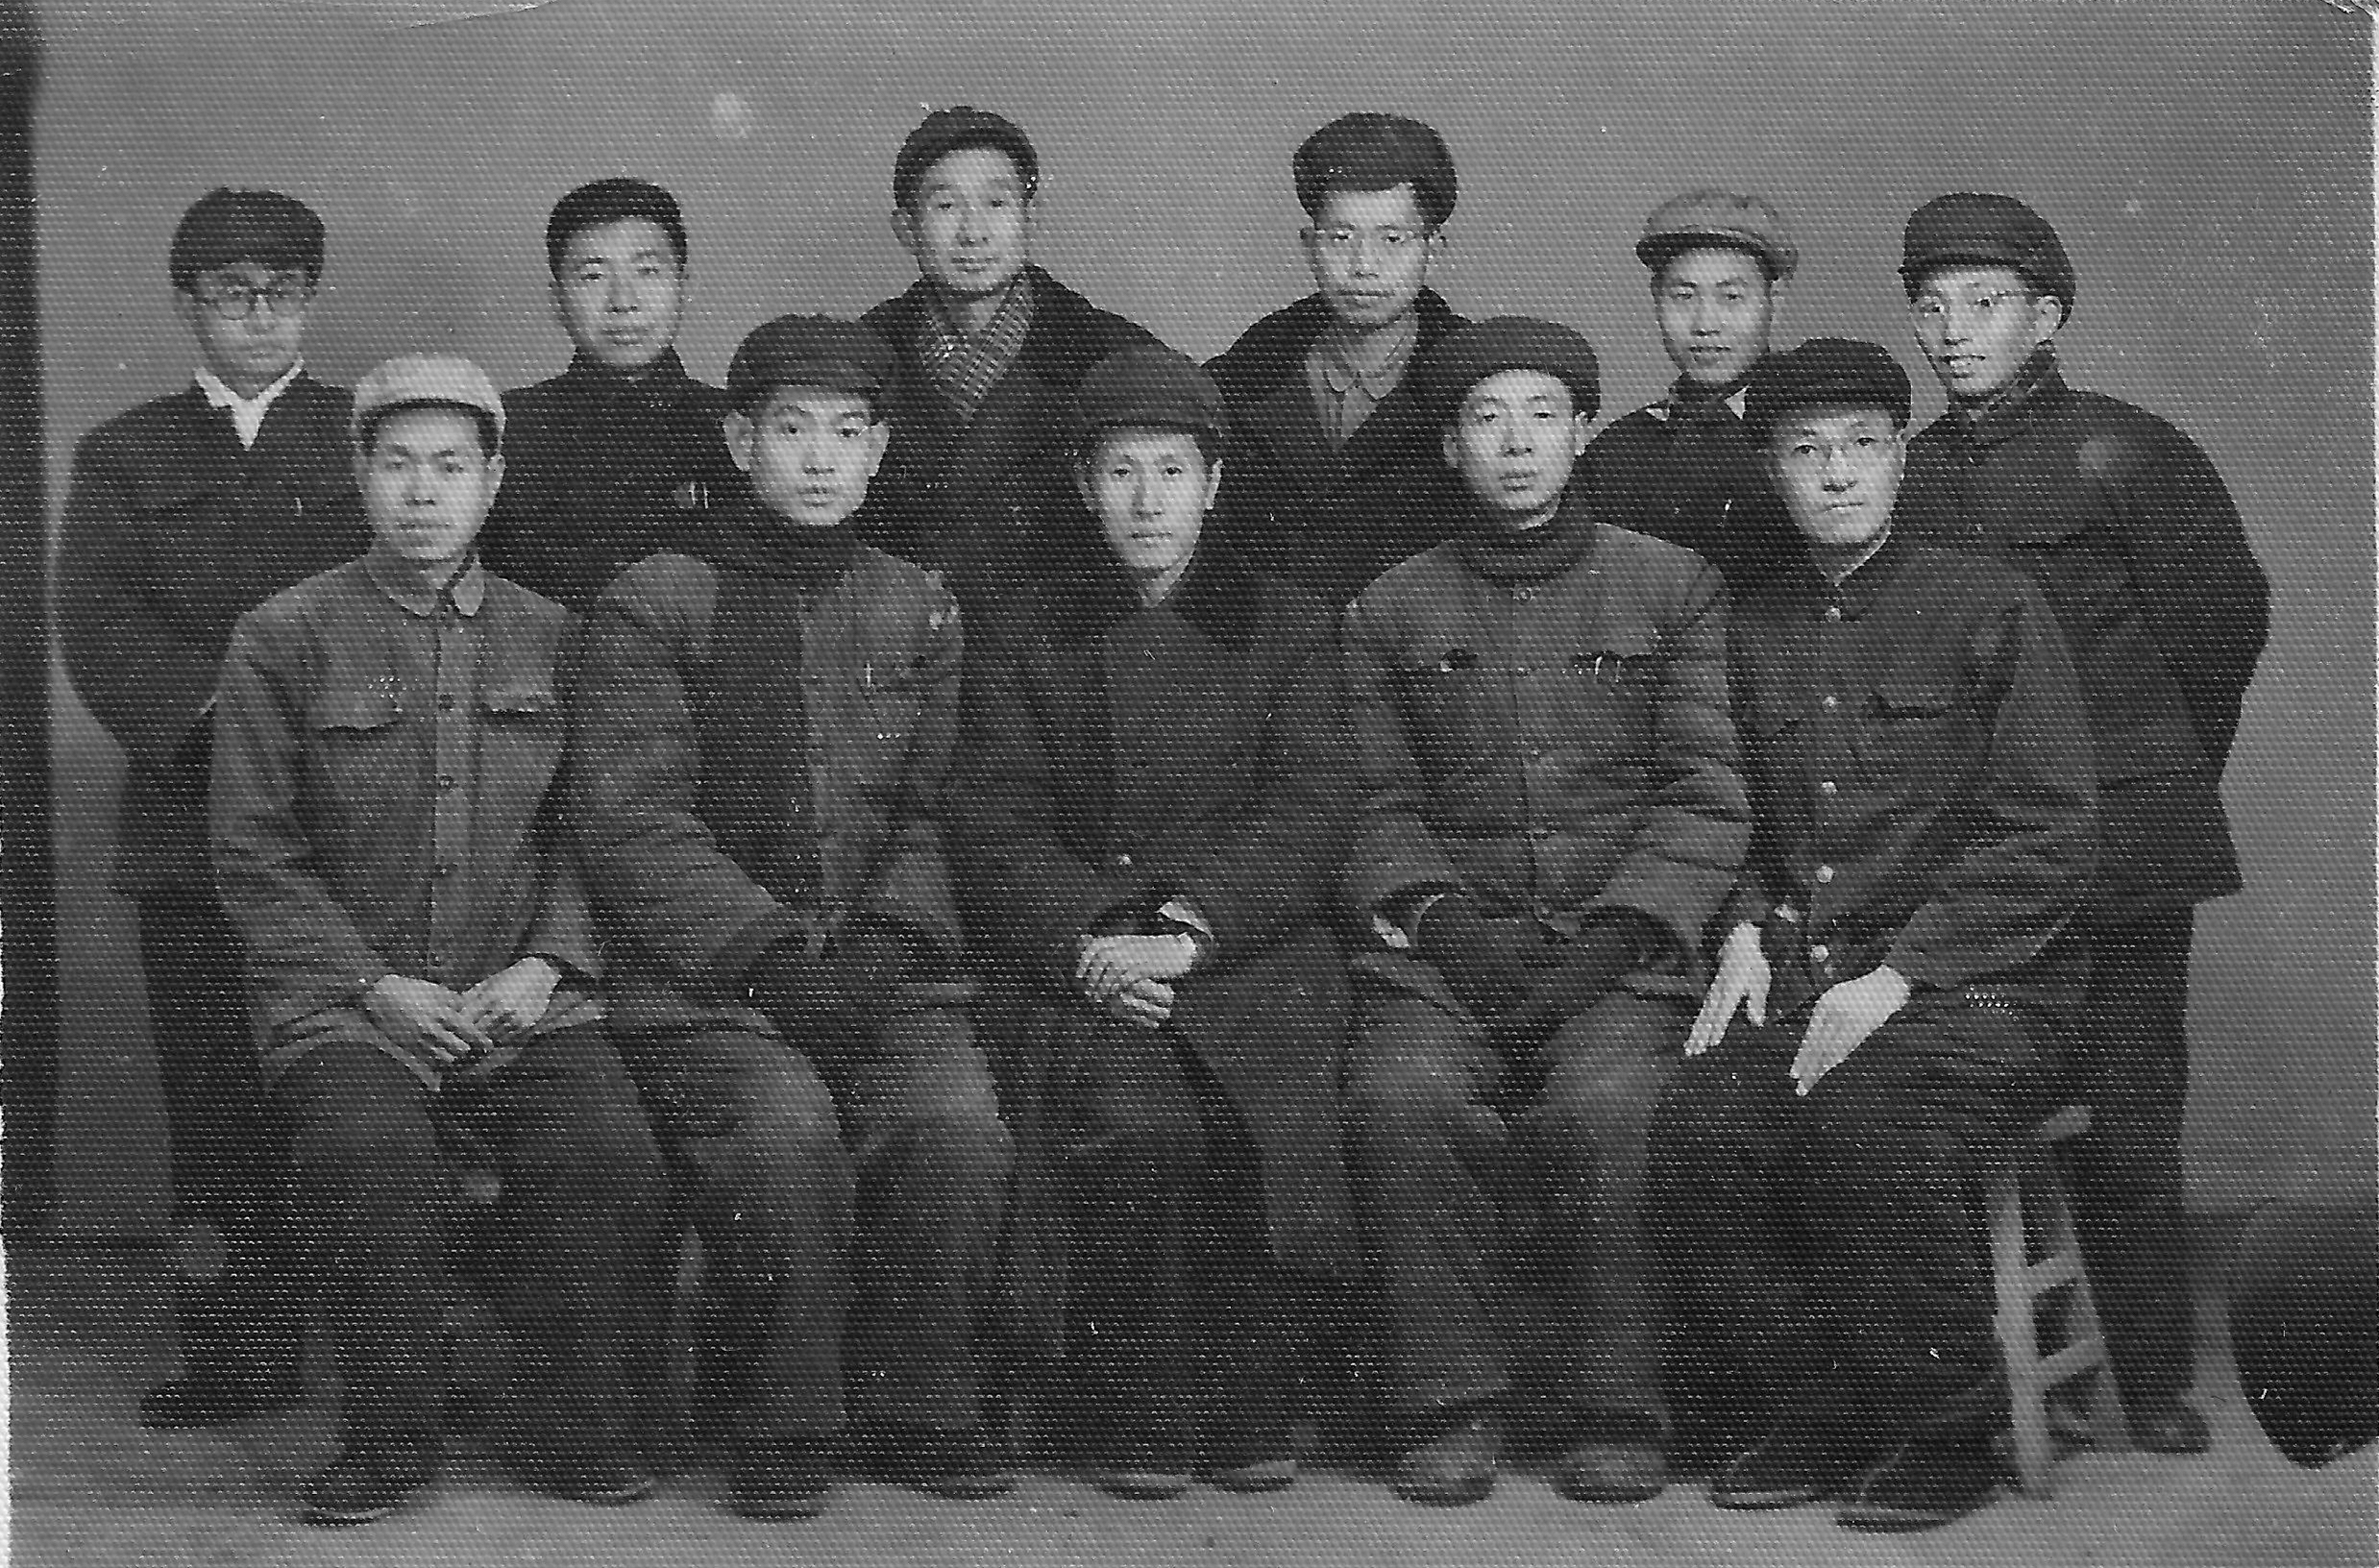 Mao Yushi, aged 31, appears in a photograph [seated, second from the right] with other 'rightists' sent to Shandong Province in 1960 [Courtesy Mao Yushi]